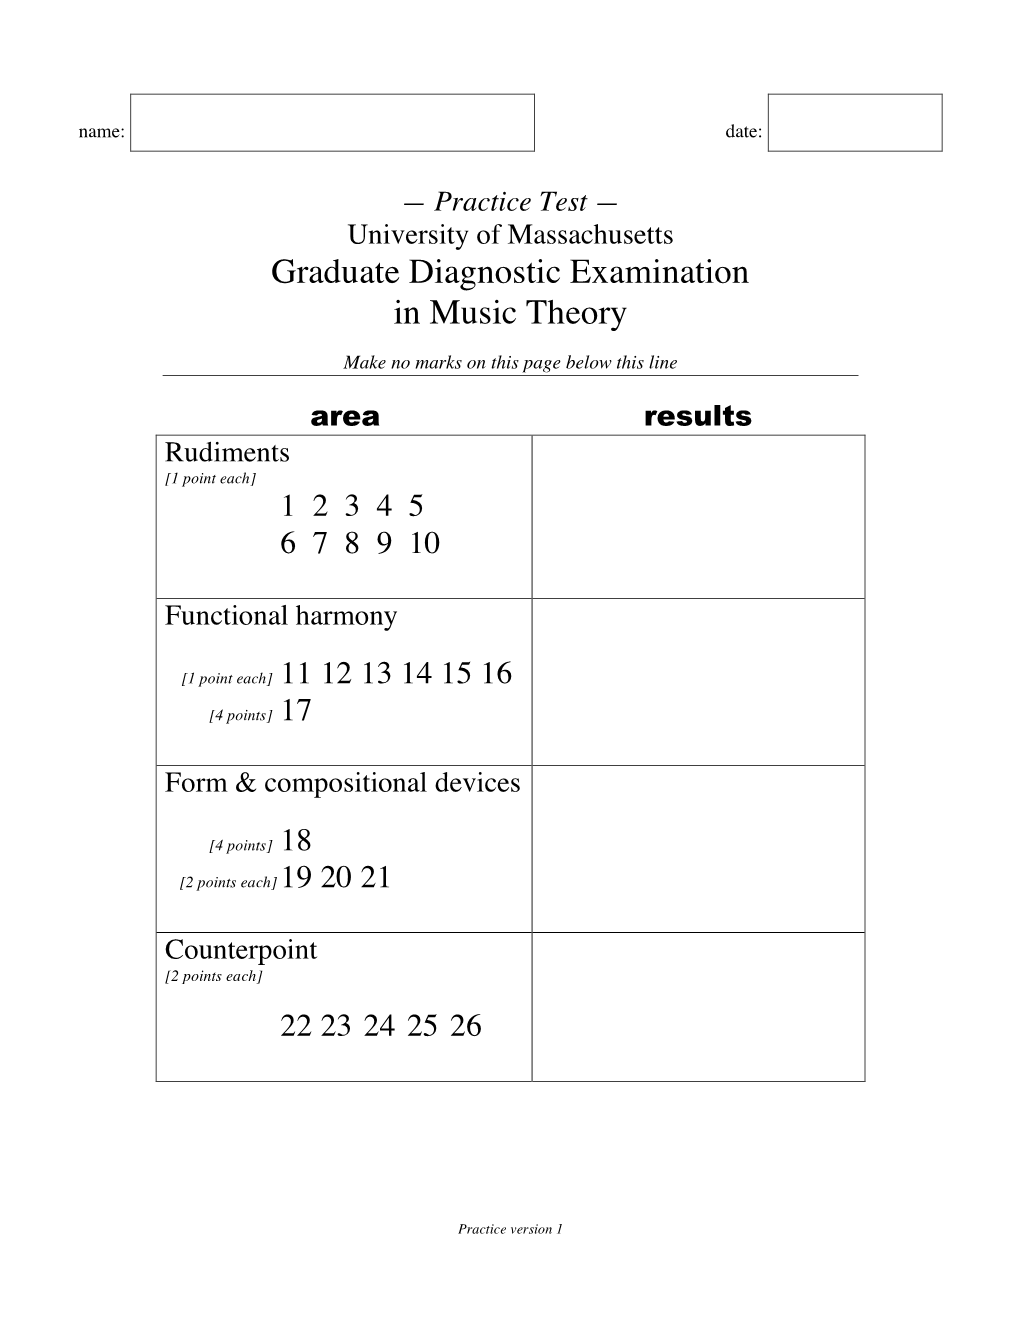 Graduate Diagnostic Examination in Music Theory